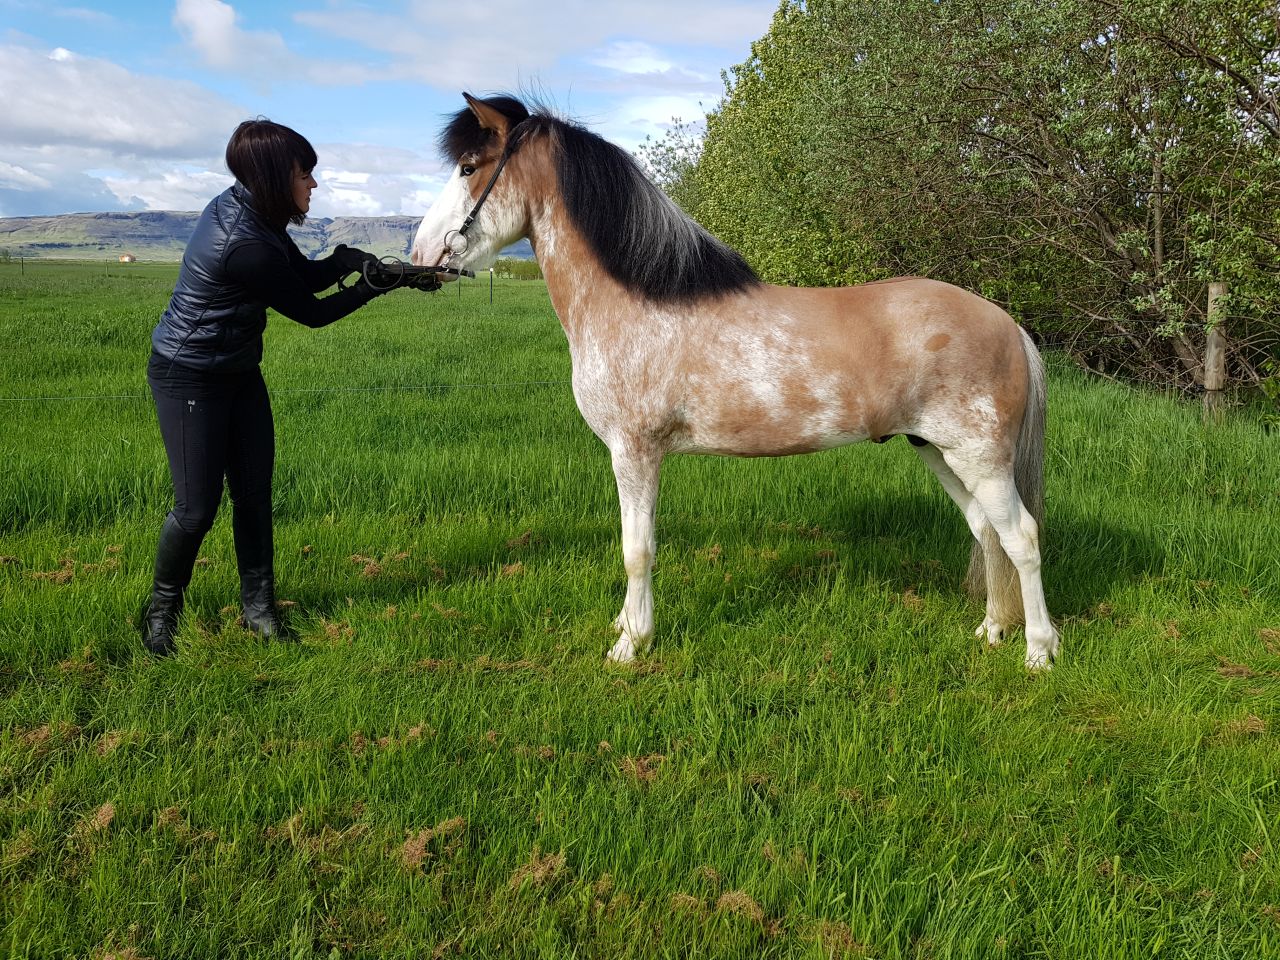 The farm -- located in Iceland's south -- has already reserved breeding spots with Ellert for next summer. Eiðsson said they had noticed that interest in the stallion is rising. "We're trying to care for all of them in the best way so that they will carry this DNA to the next coming generations," he added.